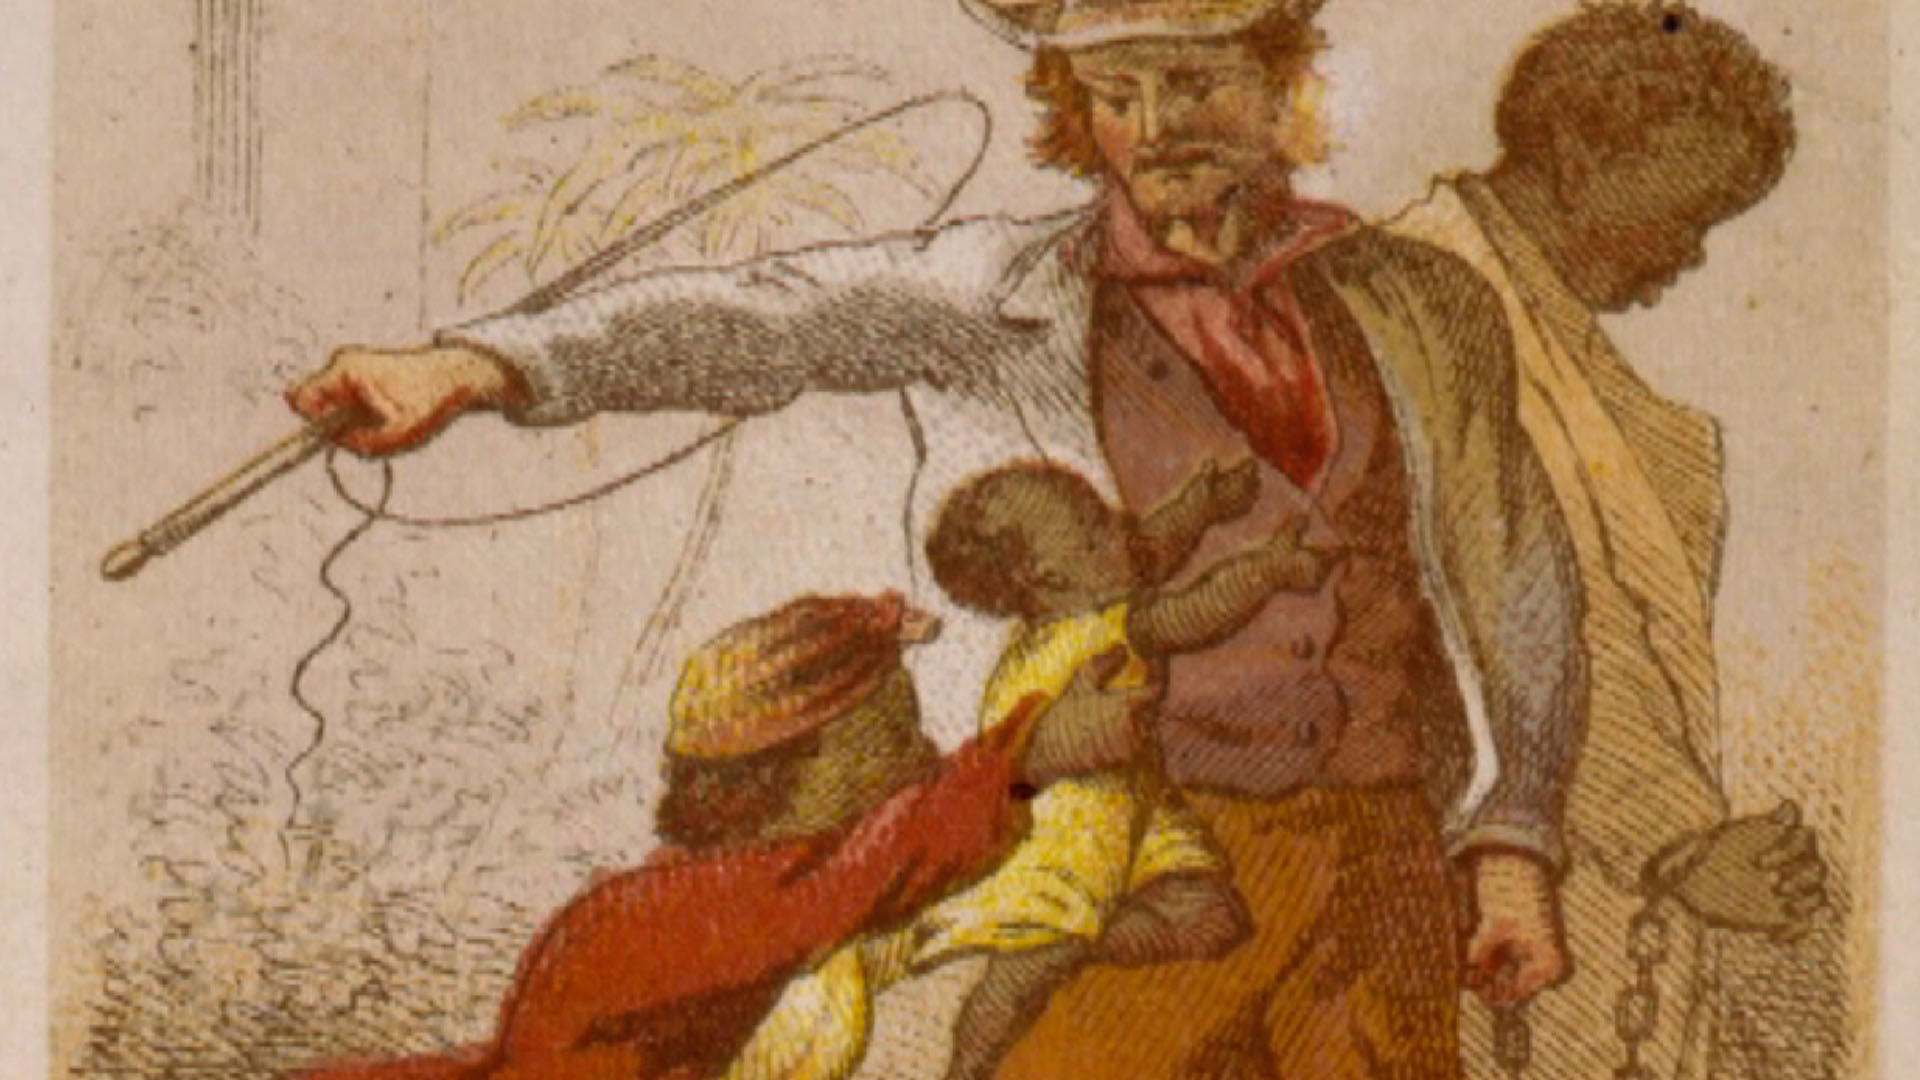 The Shocking Photo of 'Whipped Peter' That Made Slavery's